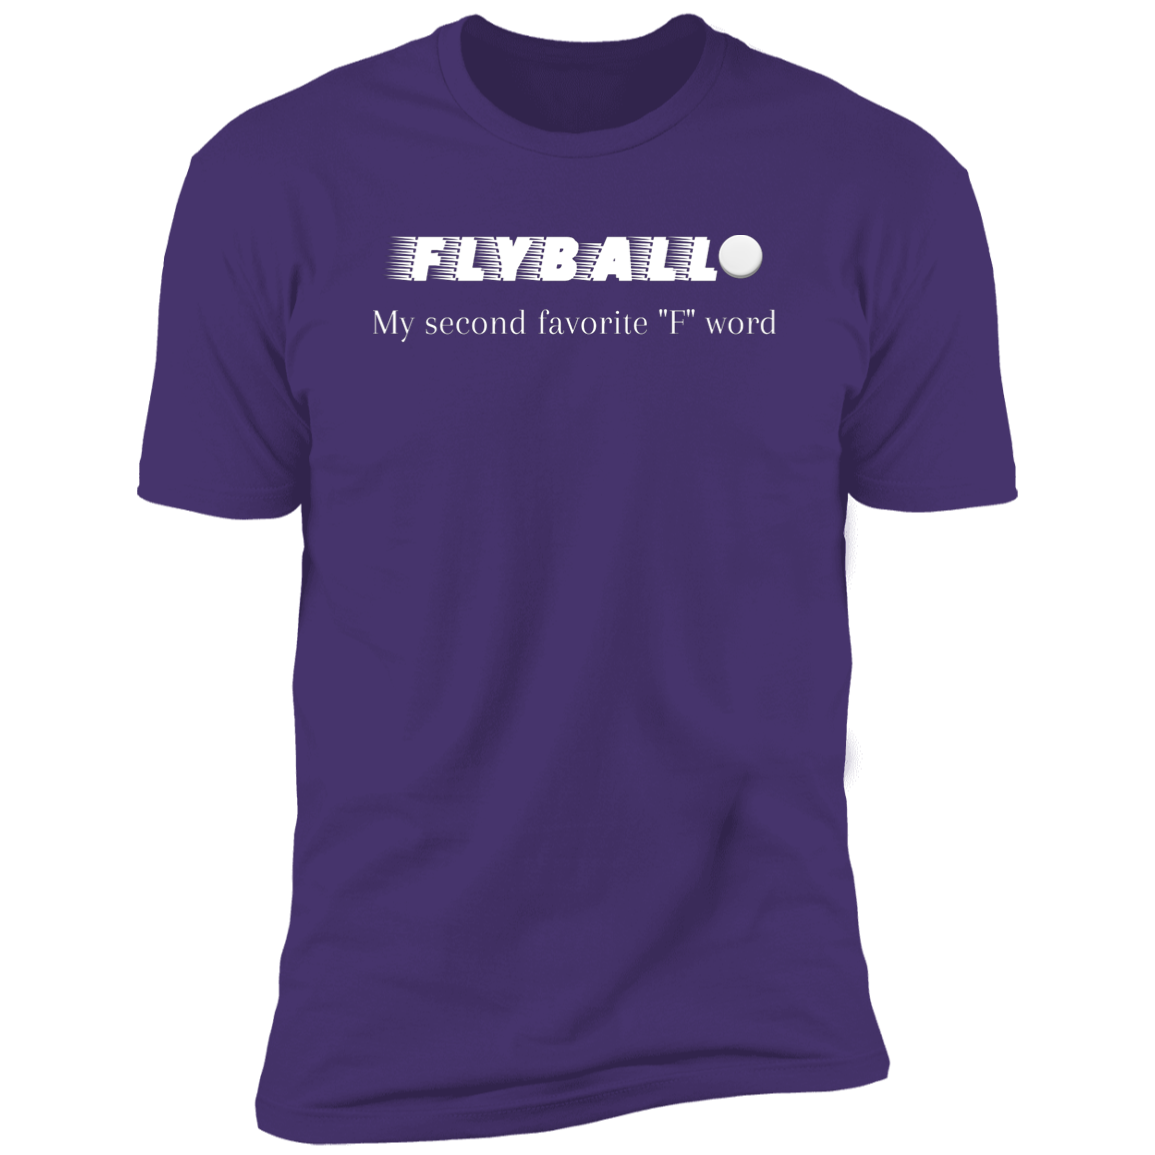 Flyball My second favorite 'f' word flyball t-shirt, dog shirt for humans, sporting dog shirt, in purple rush